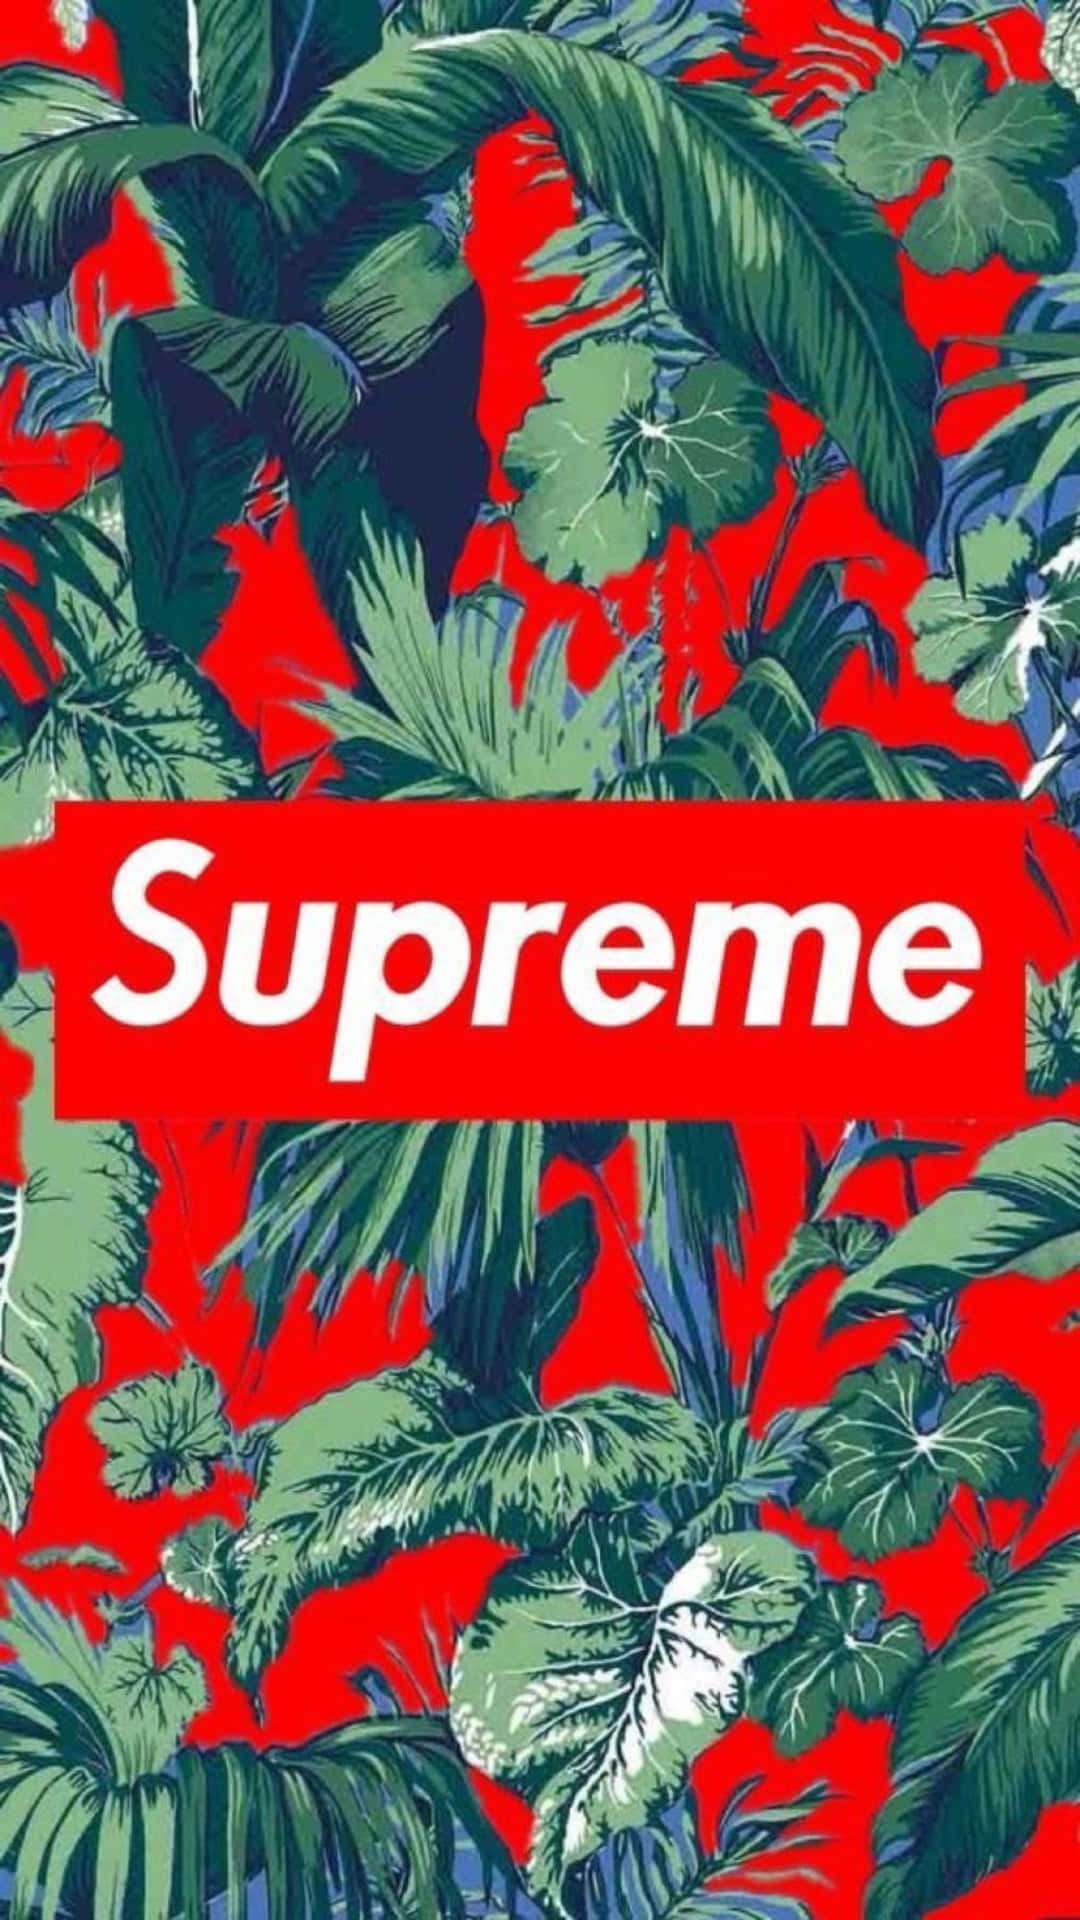 Check out this stylish and modern Supreme Iphone Wallpaper